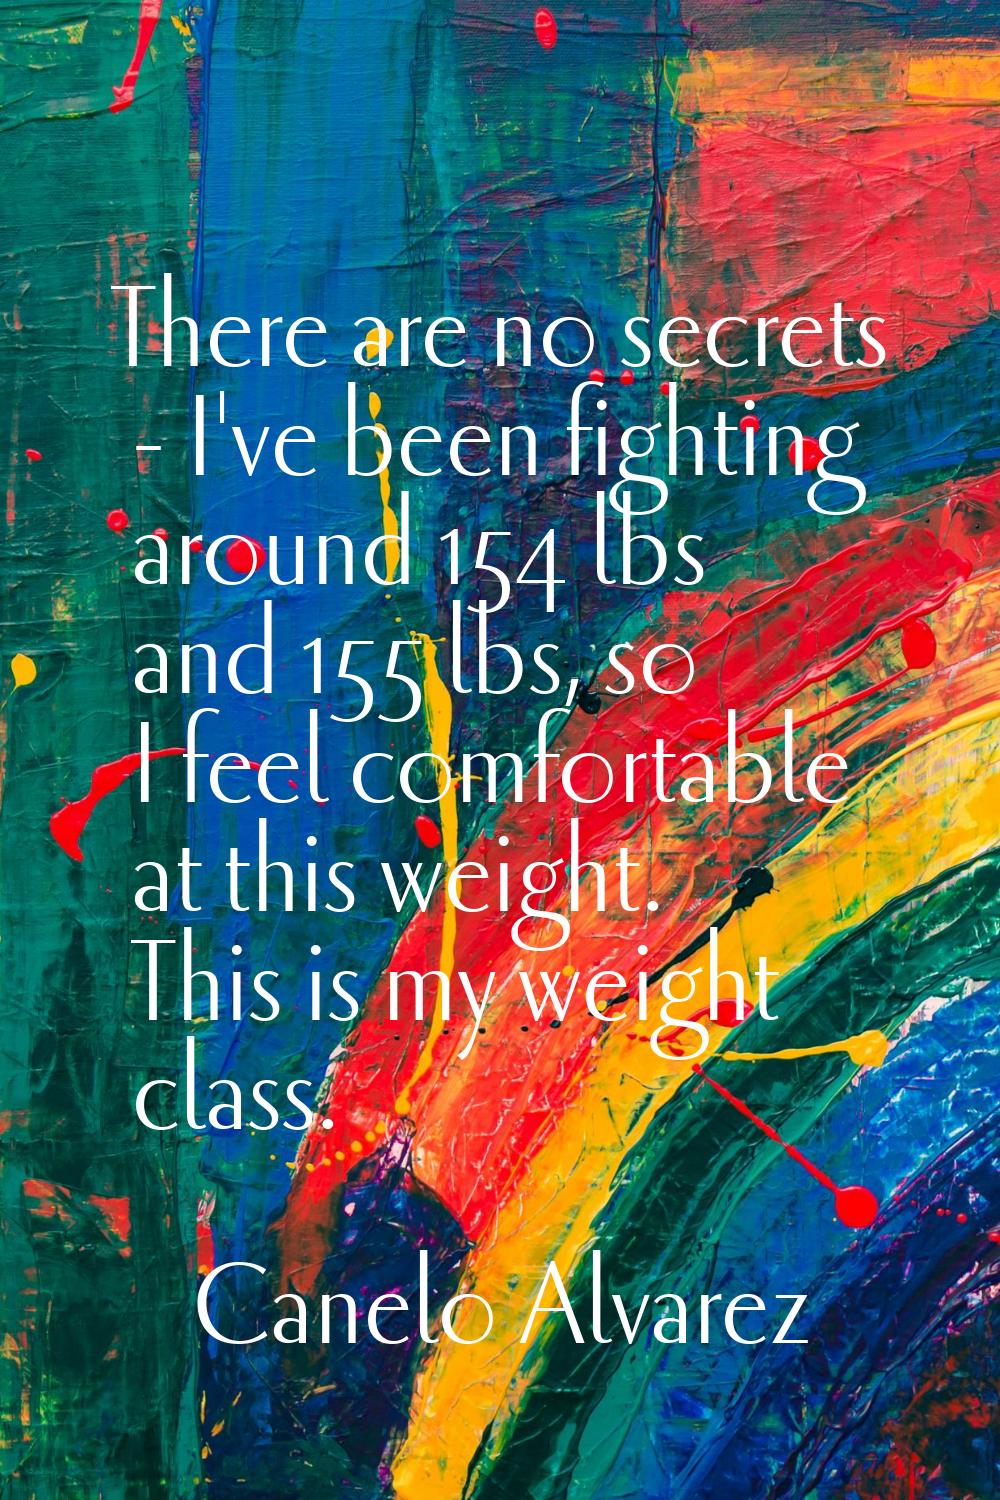 There are no secrets - I've been fighting around 154 lbs and 155 lbs, so I feel comfortable at this